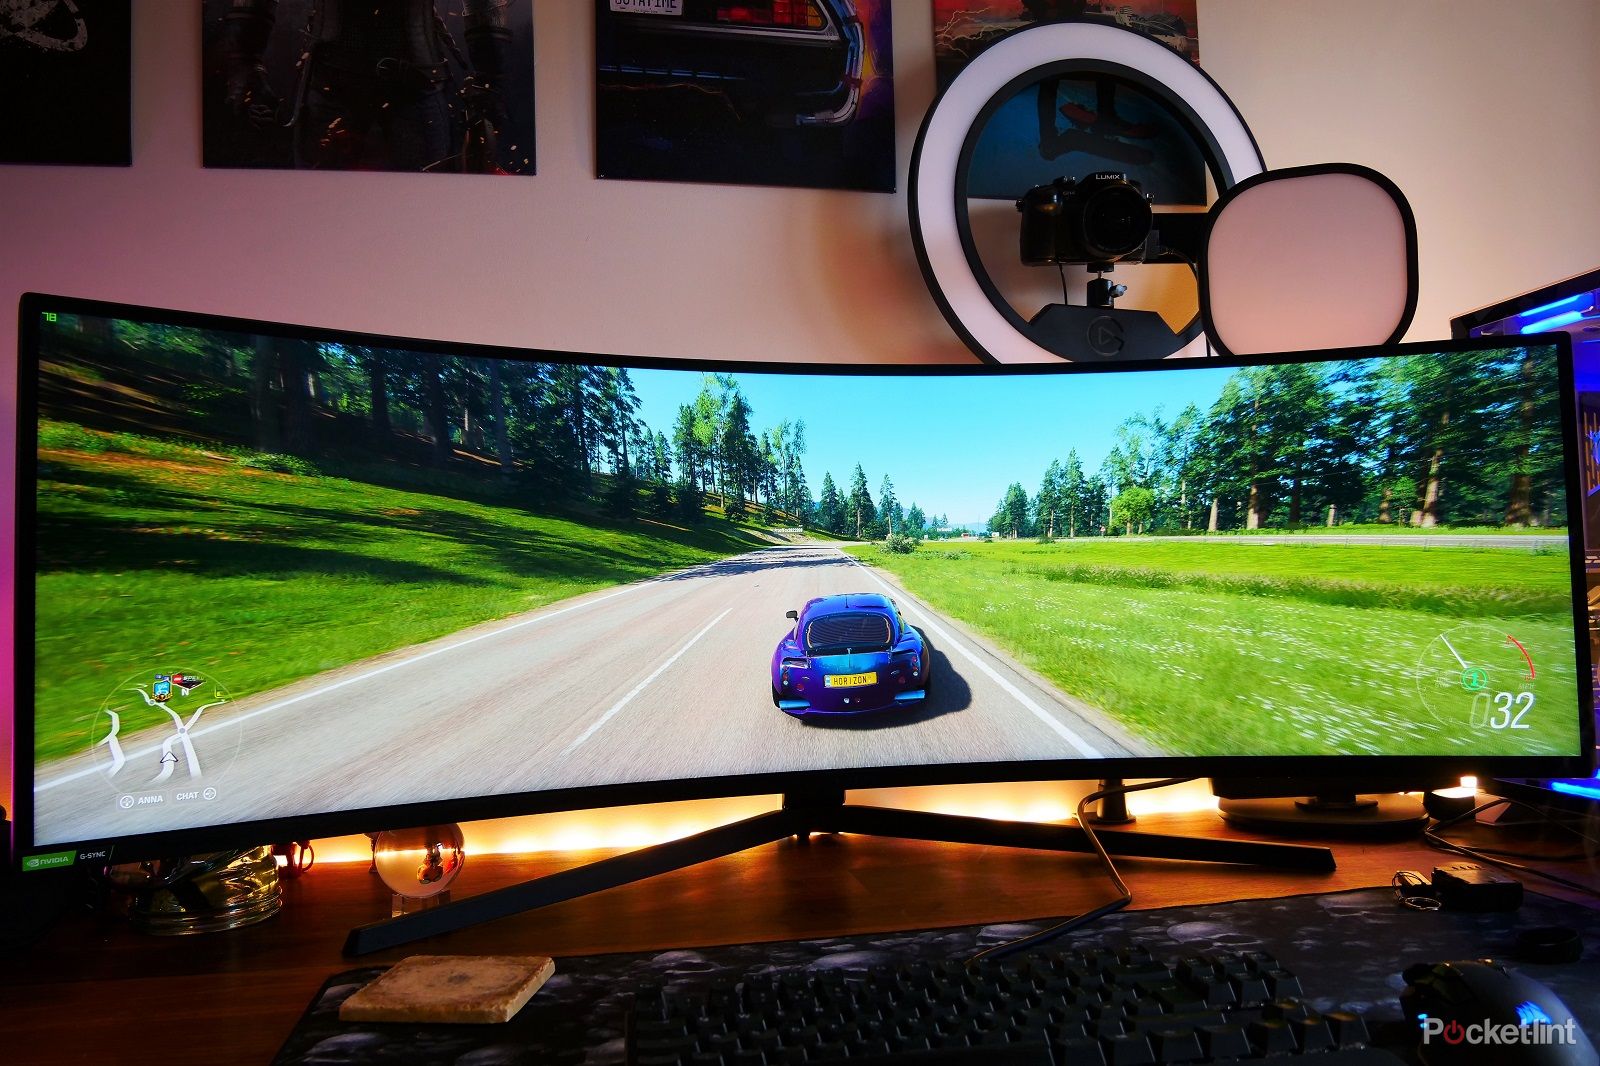 The Samsung Odyssey G9 49-inch monitor is currently a bargain for Prime Day photo 1